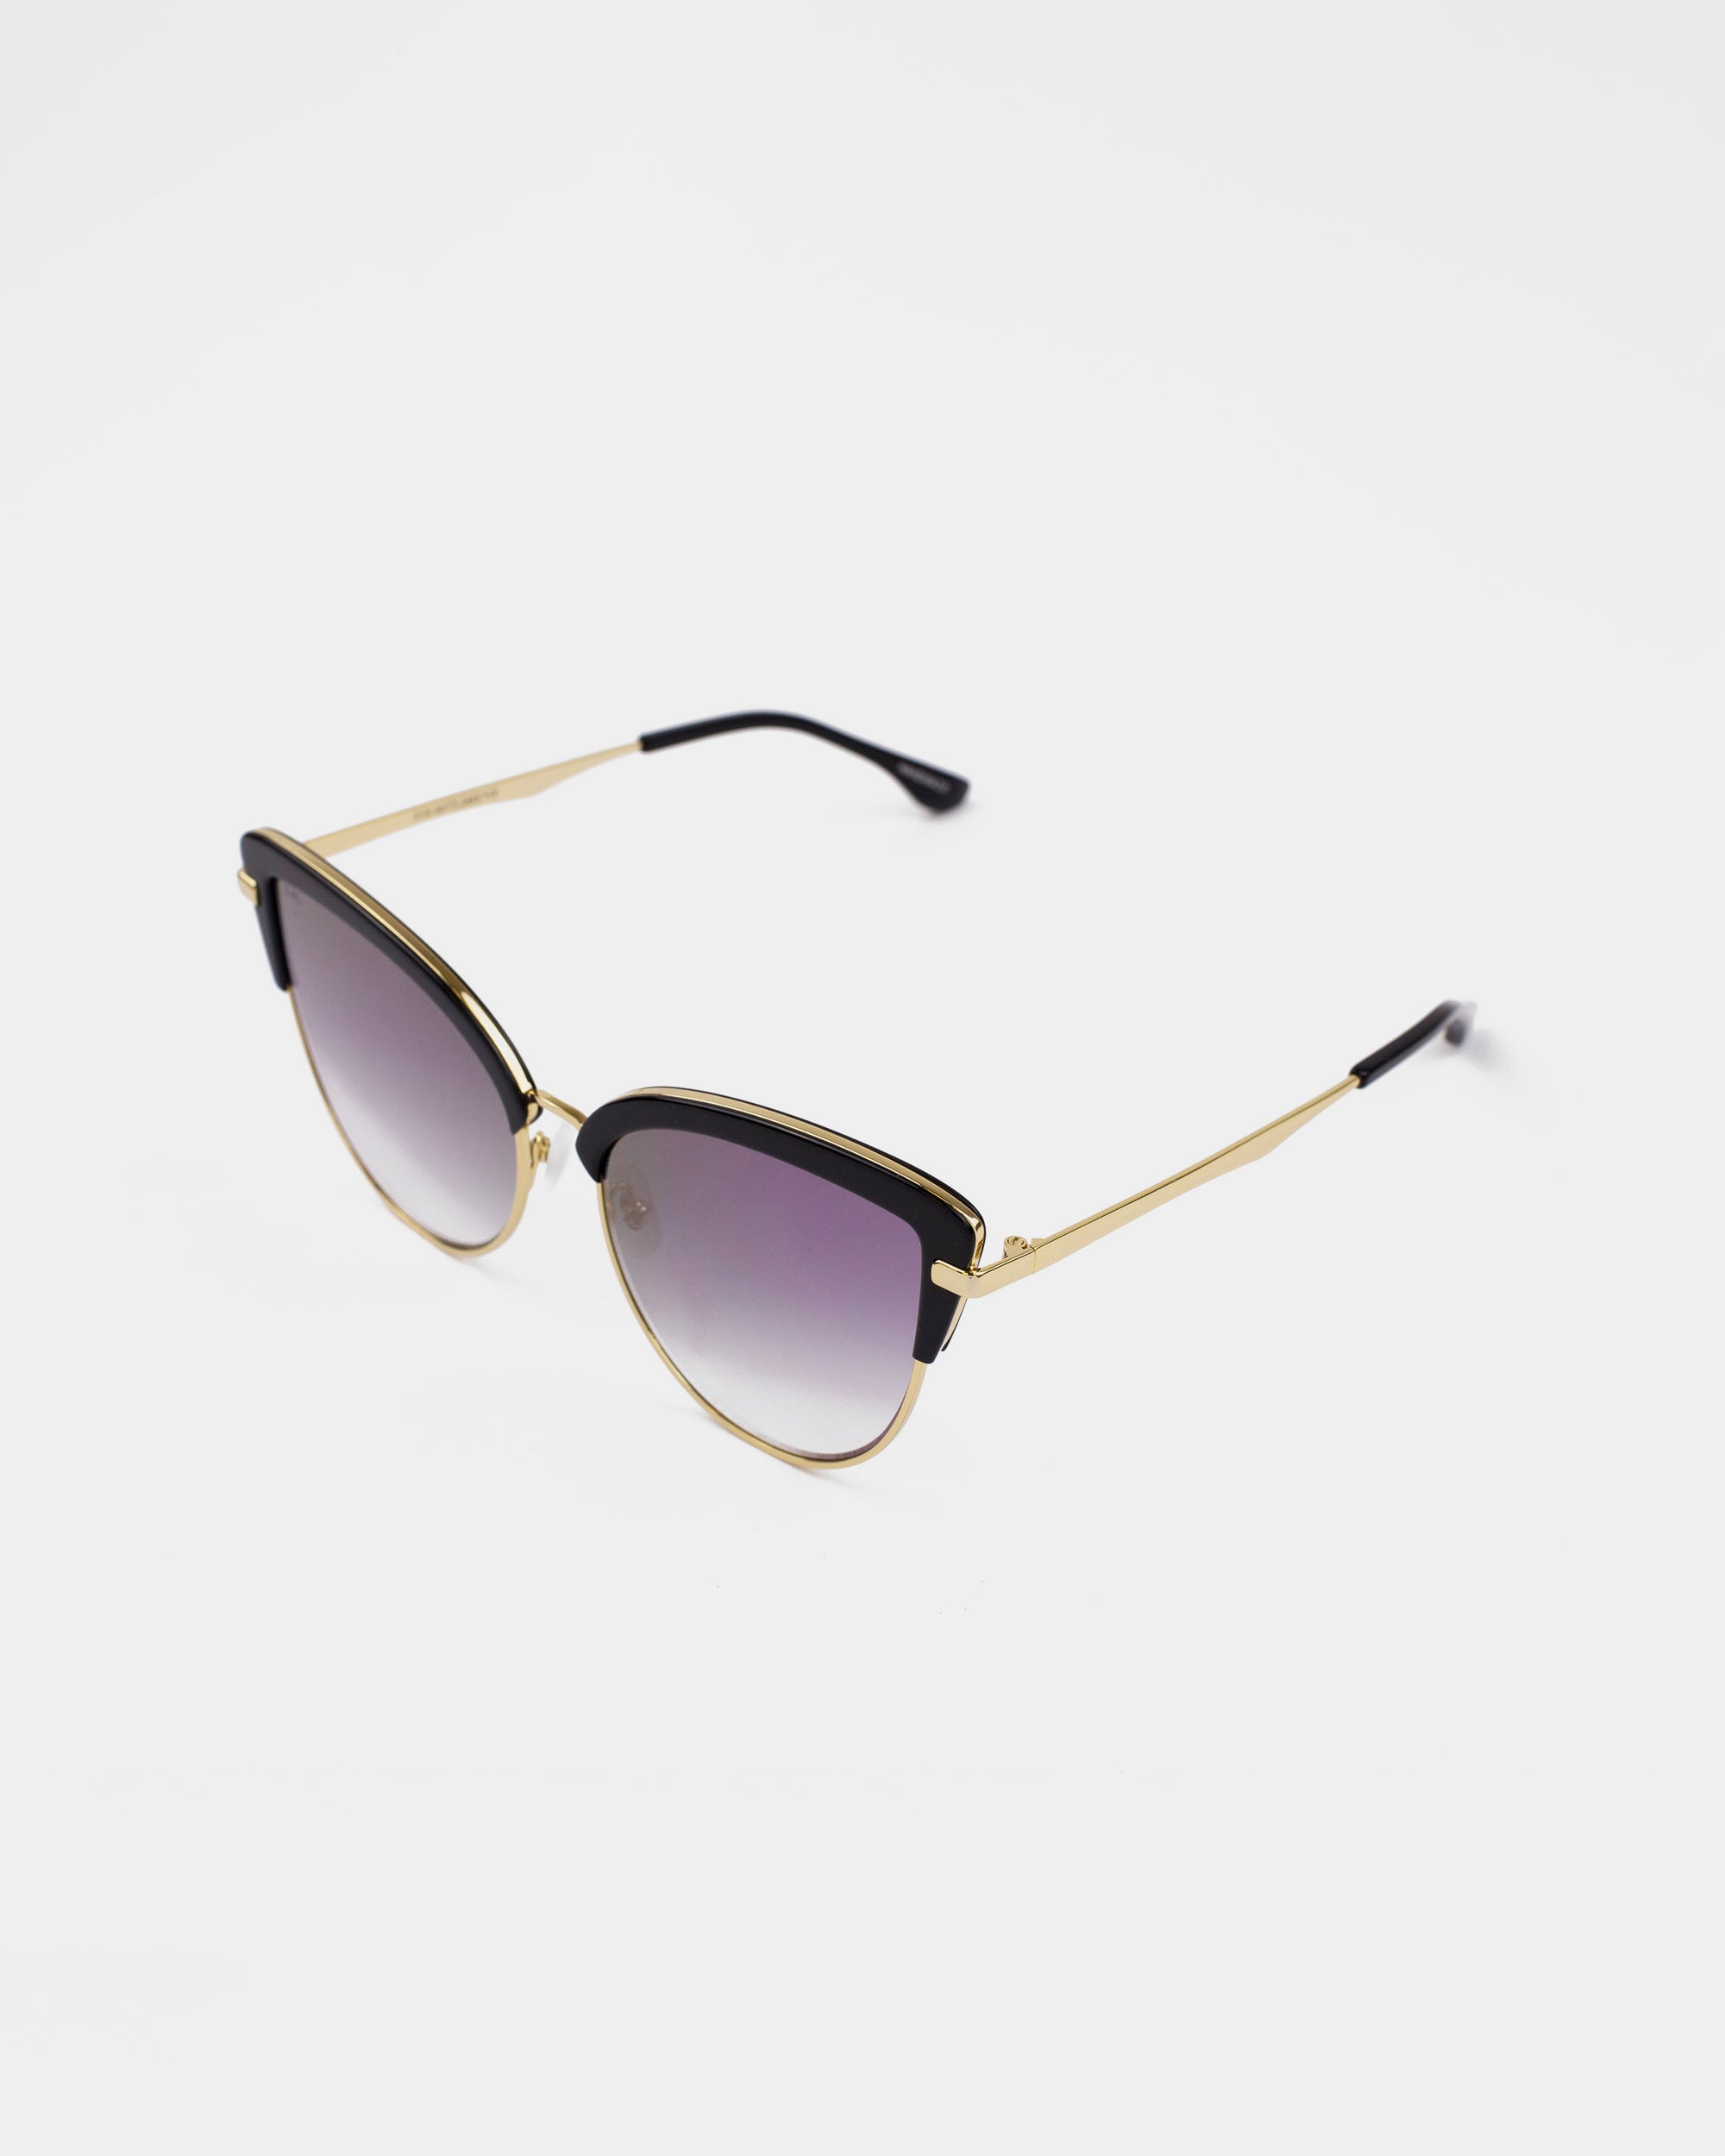 A pair of stylish For Art&#39;s Sake® Venus sunglasses with an 18-karat gold-plated black frame. The nylon lenses are gradient, transitioning from dark at the top to lighter towards the bottom. The thin arms feature black tips for added comfort. The background is plain white.